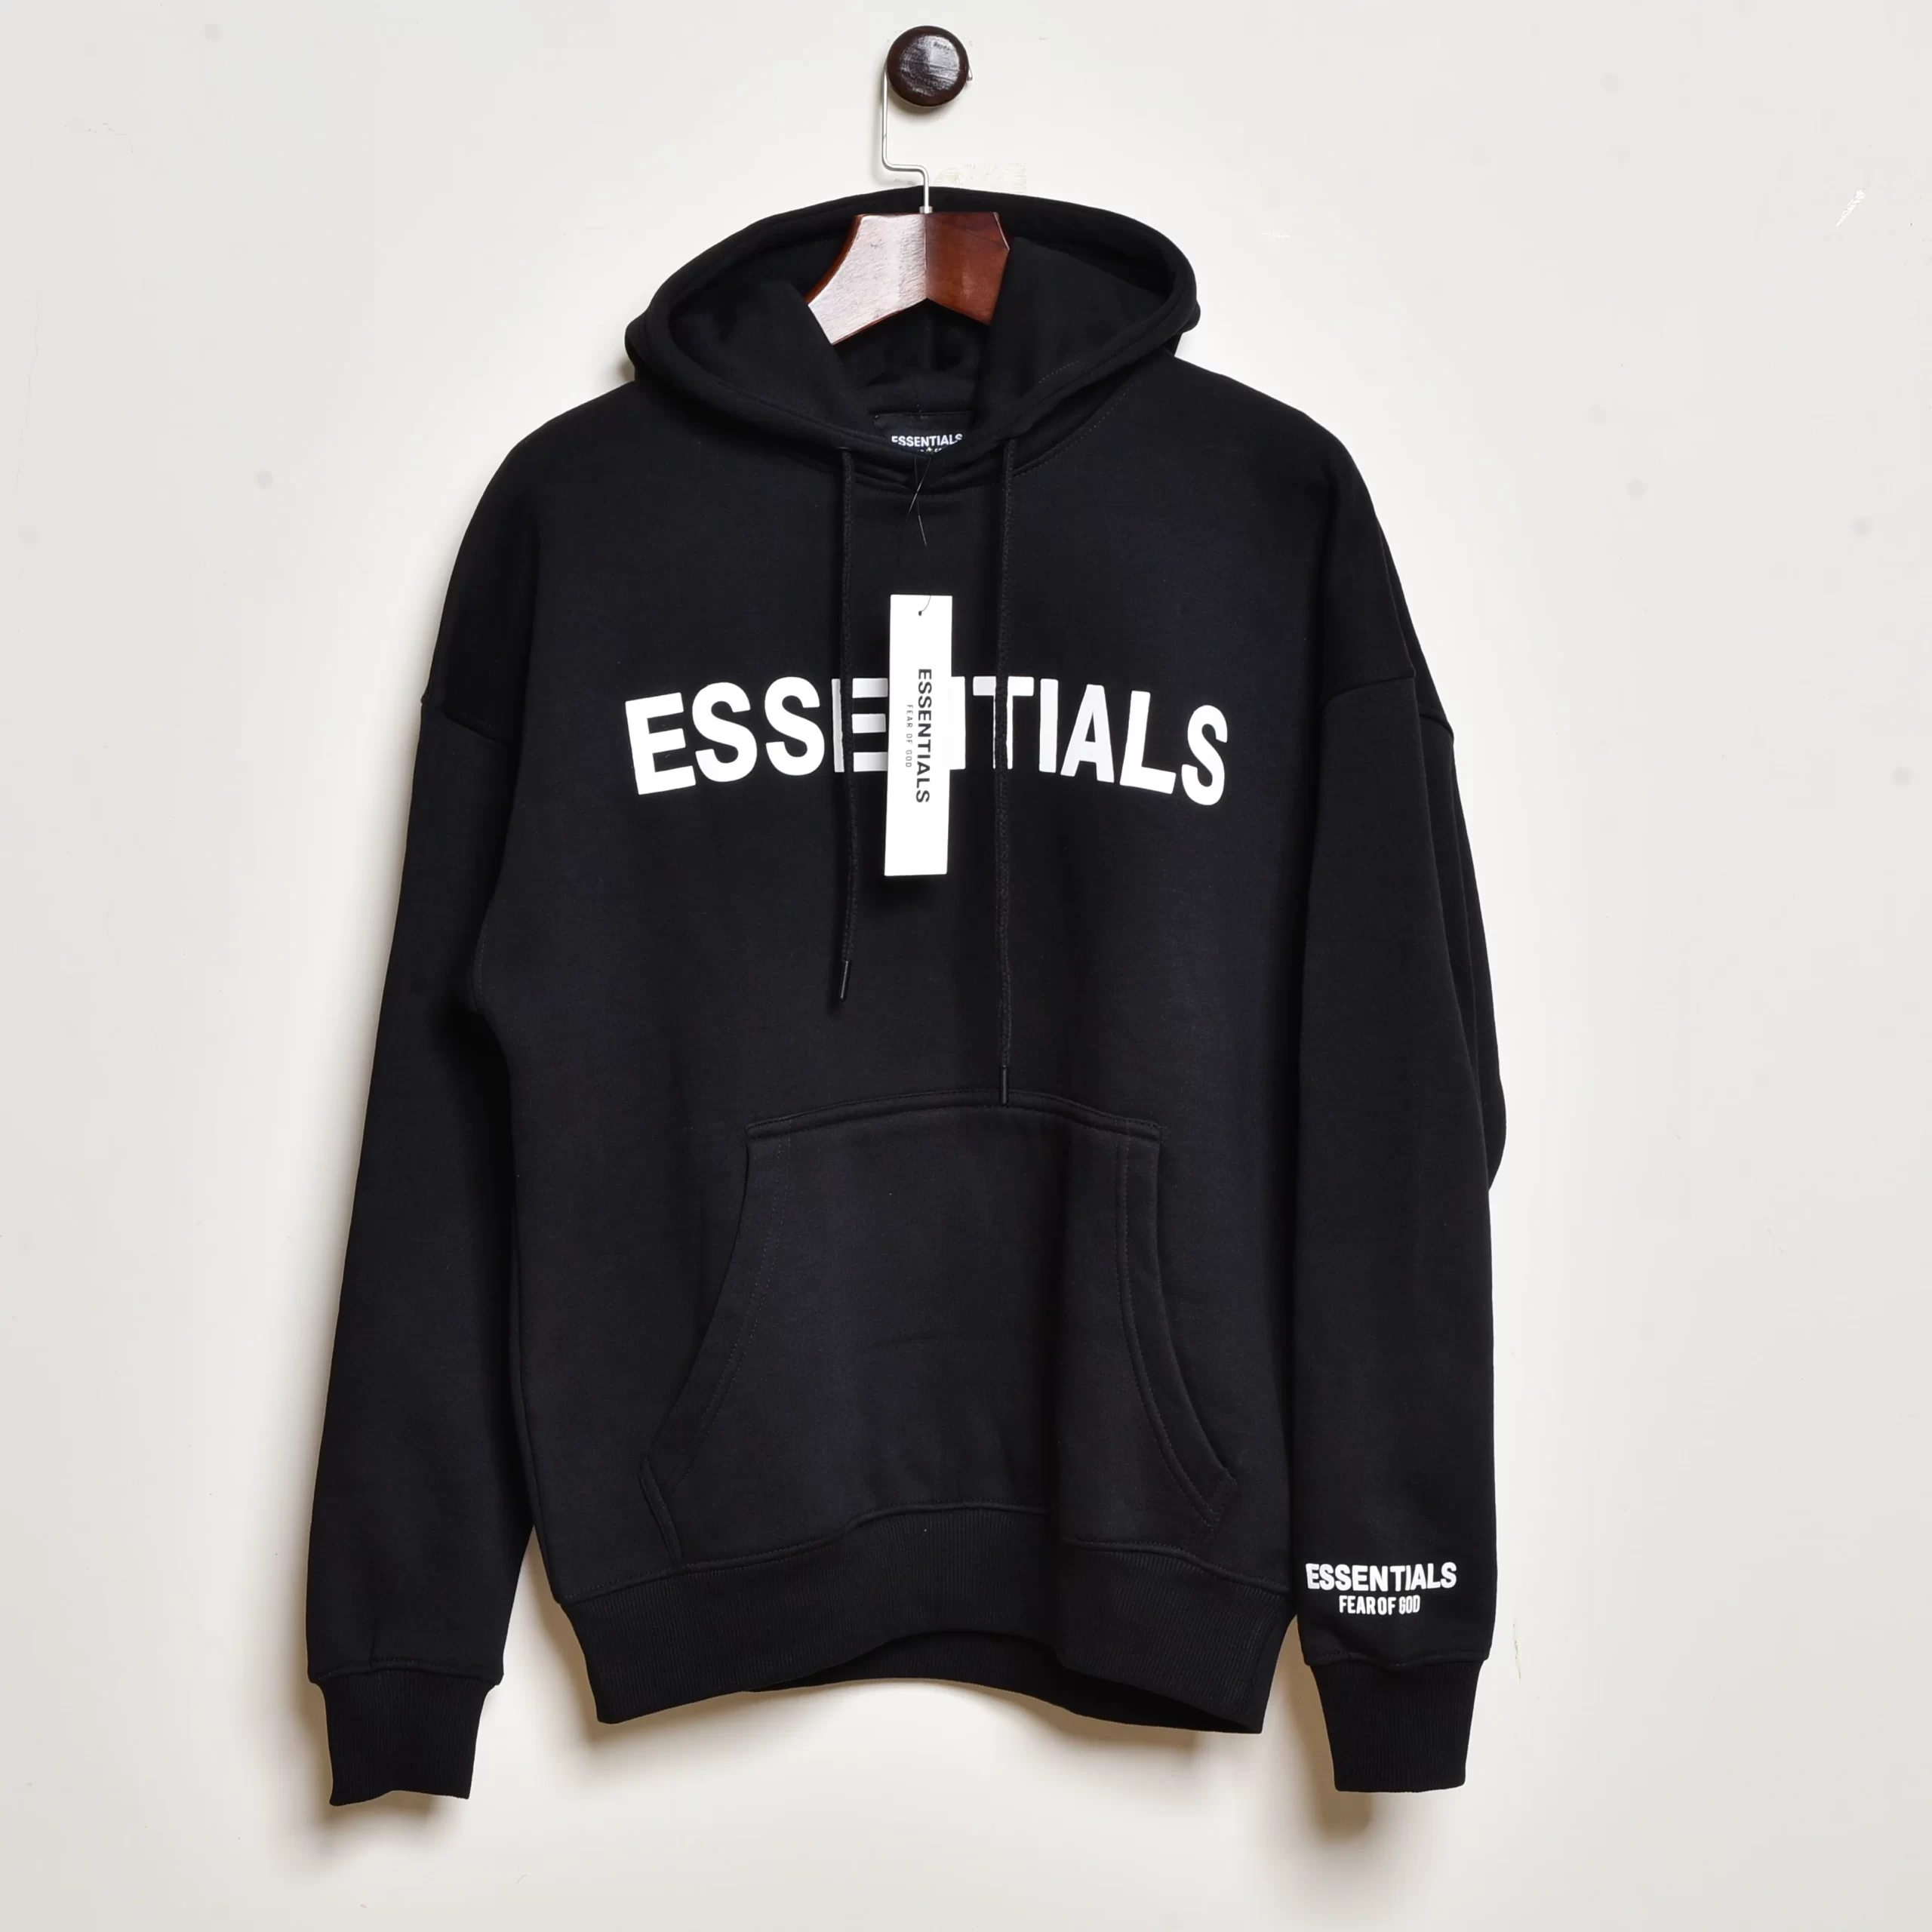 Essentials Hoodies Your Go To Fall Fashion Staple